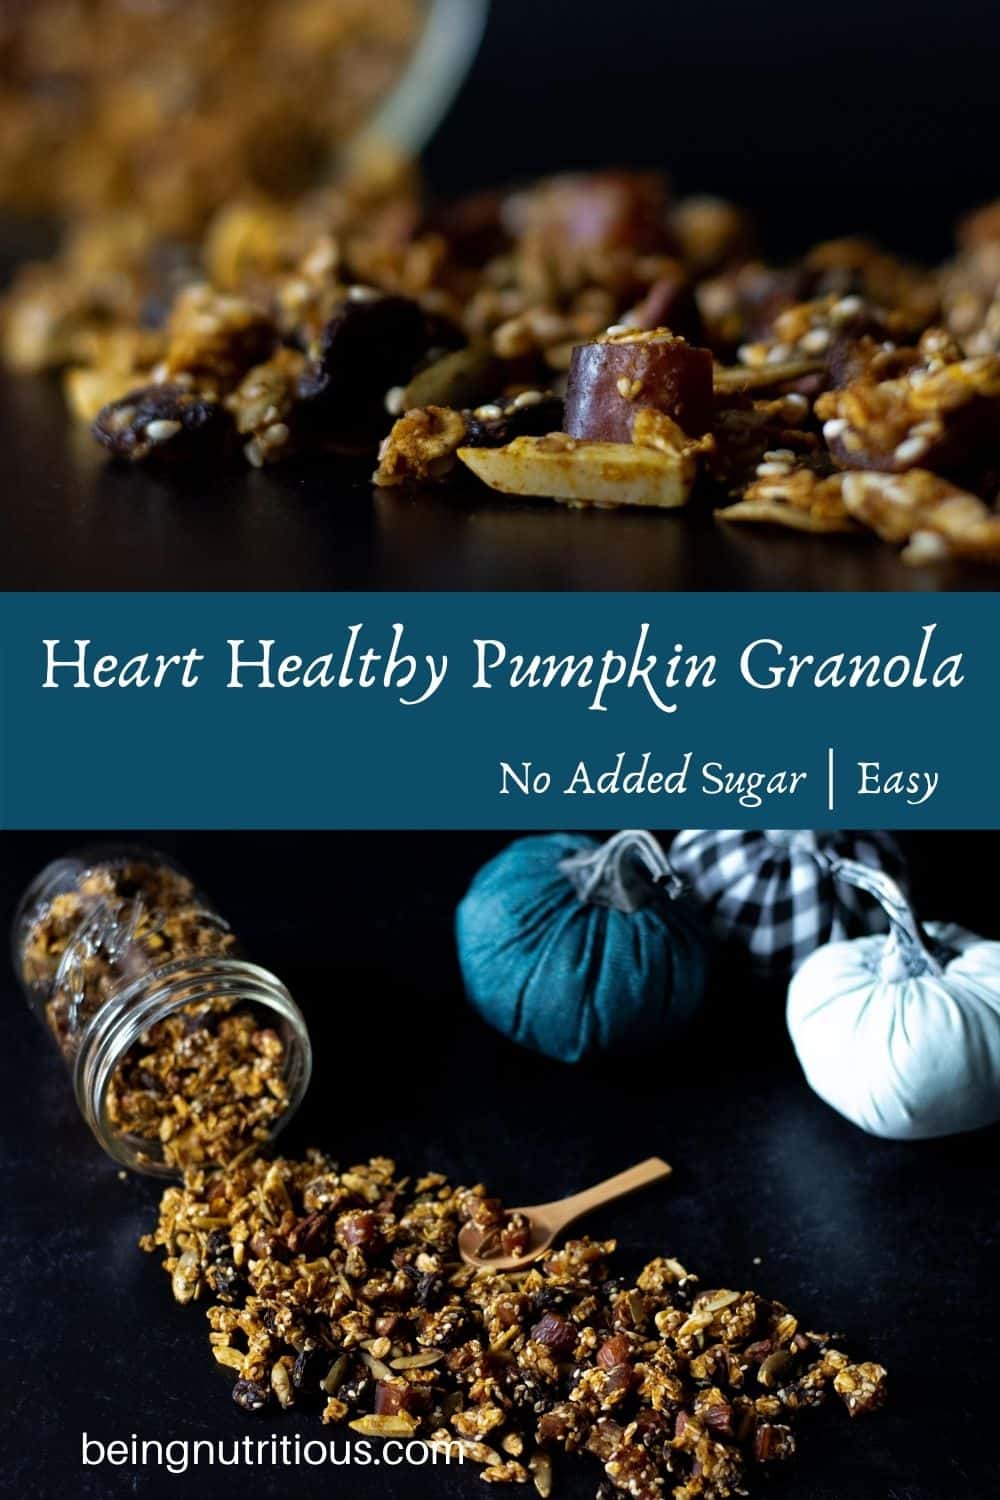 Split image; top image is close up of pumpkin granola, bottom image is granola spilling out of a Mason jar on dark background. Text overlay: Heart Healthy Pumpkin Granola, no added sugar, easy.